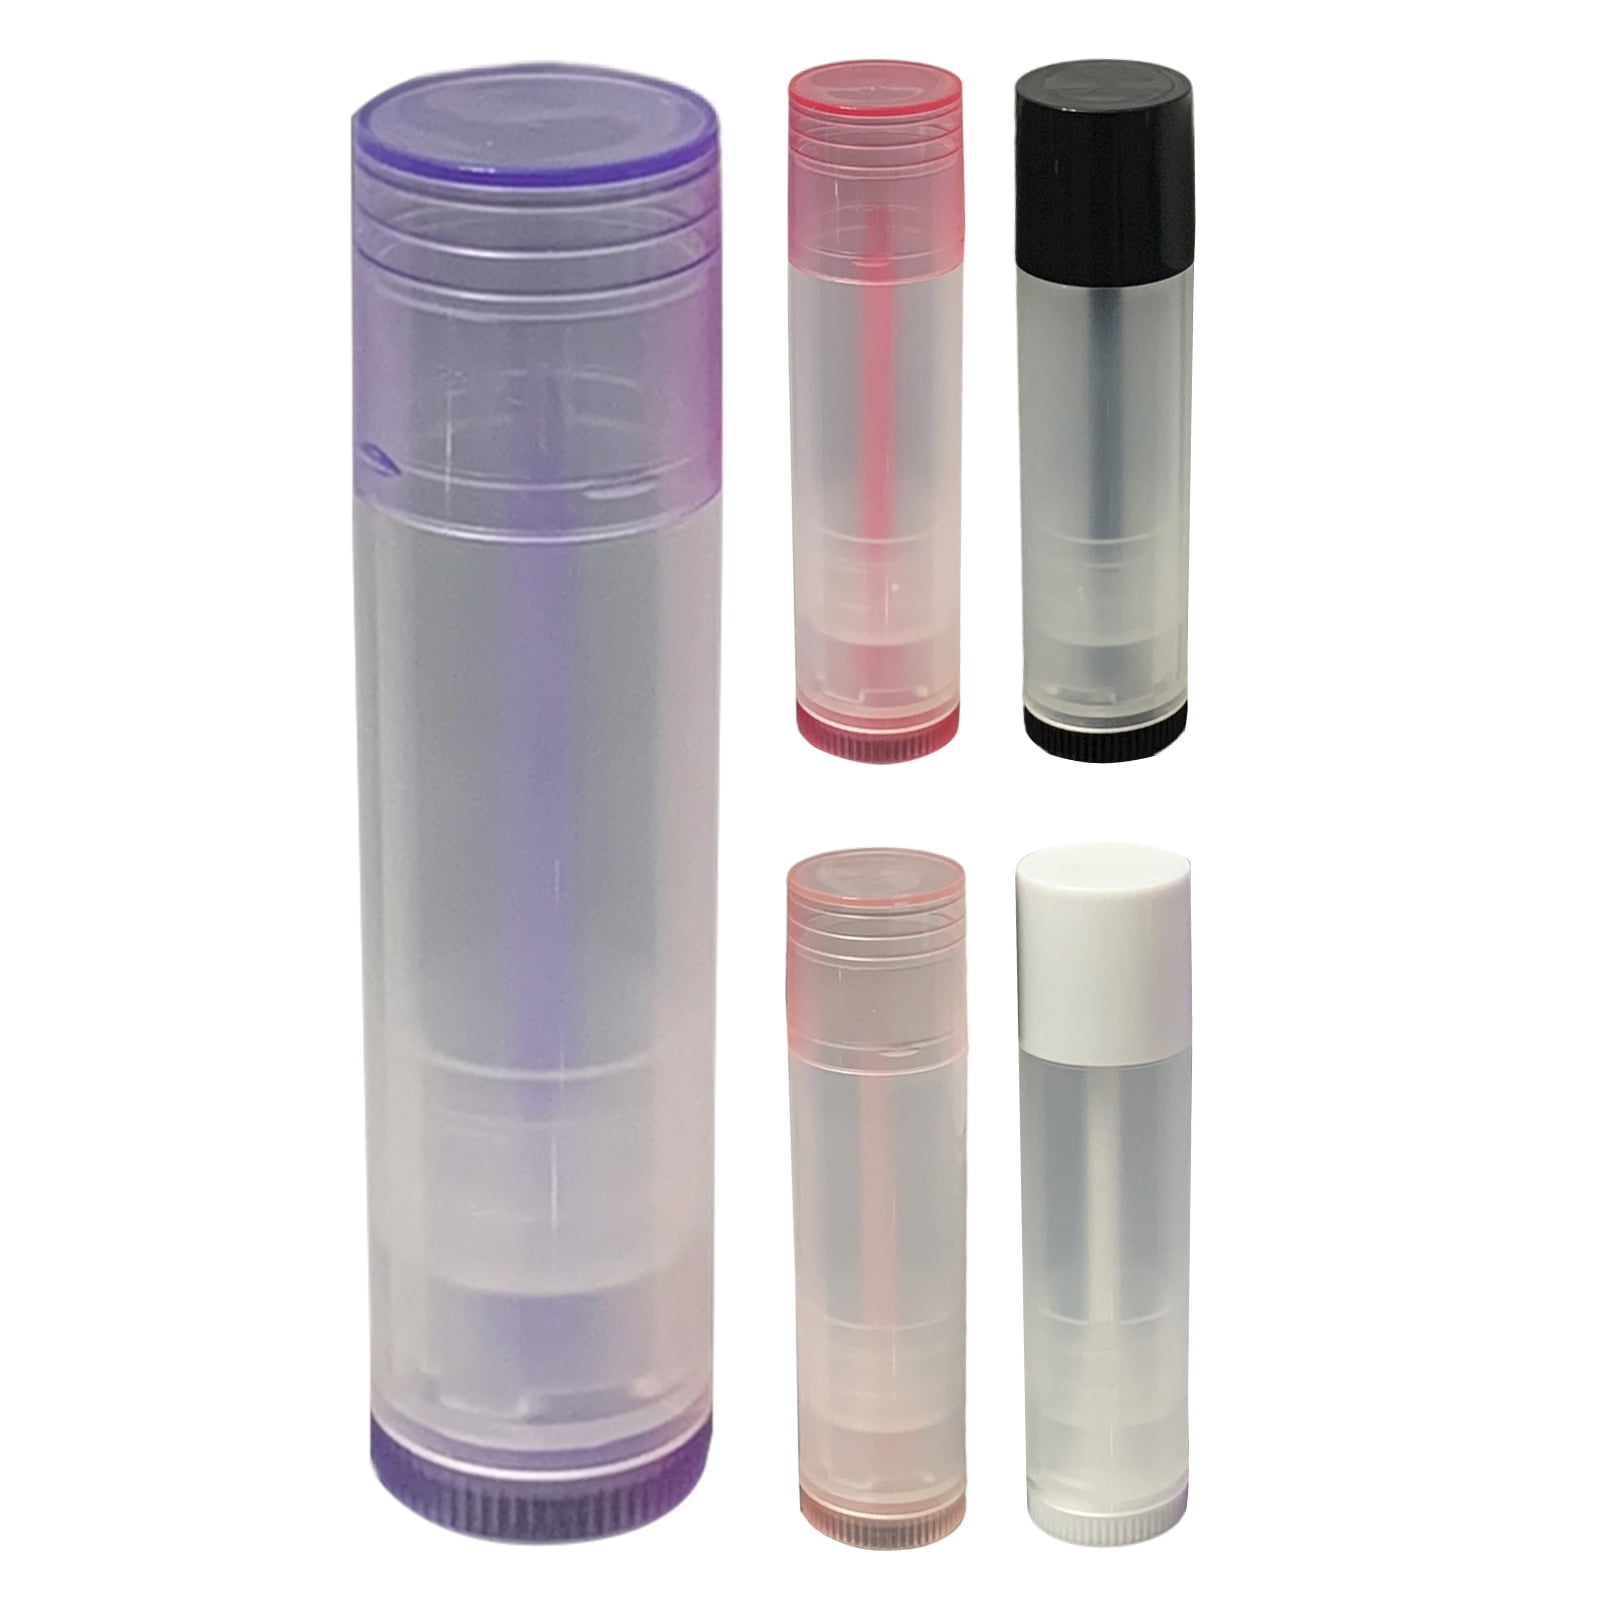 Dream Lifestyle 50 Lip Balm Tubes, Lip Balm Containers, Lipstick Tube, Plastic Container Twist Tubes, 5g Refillable Round Tubes Empty Lip Balm Bottles for DIY Lipstick Gifts, Homemade Lip Balm